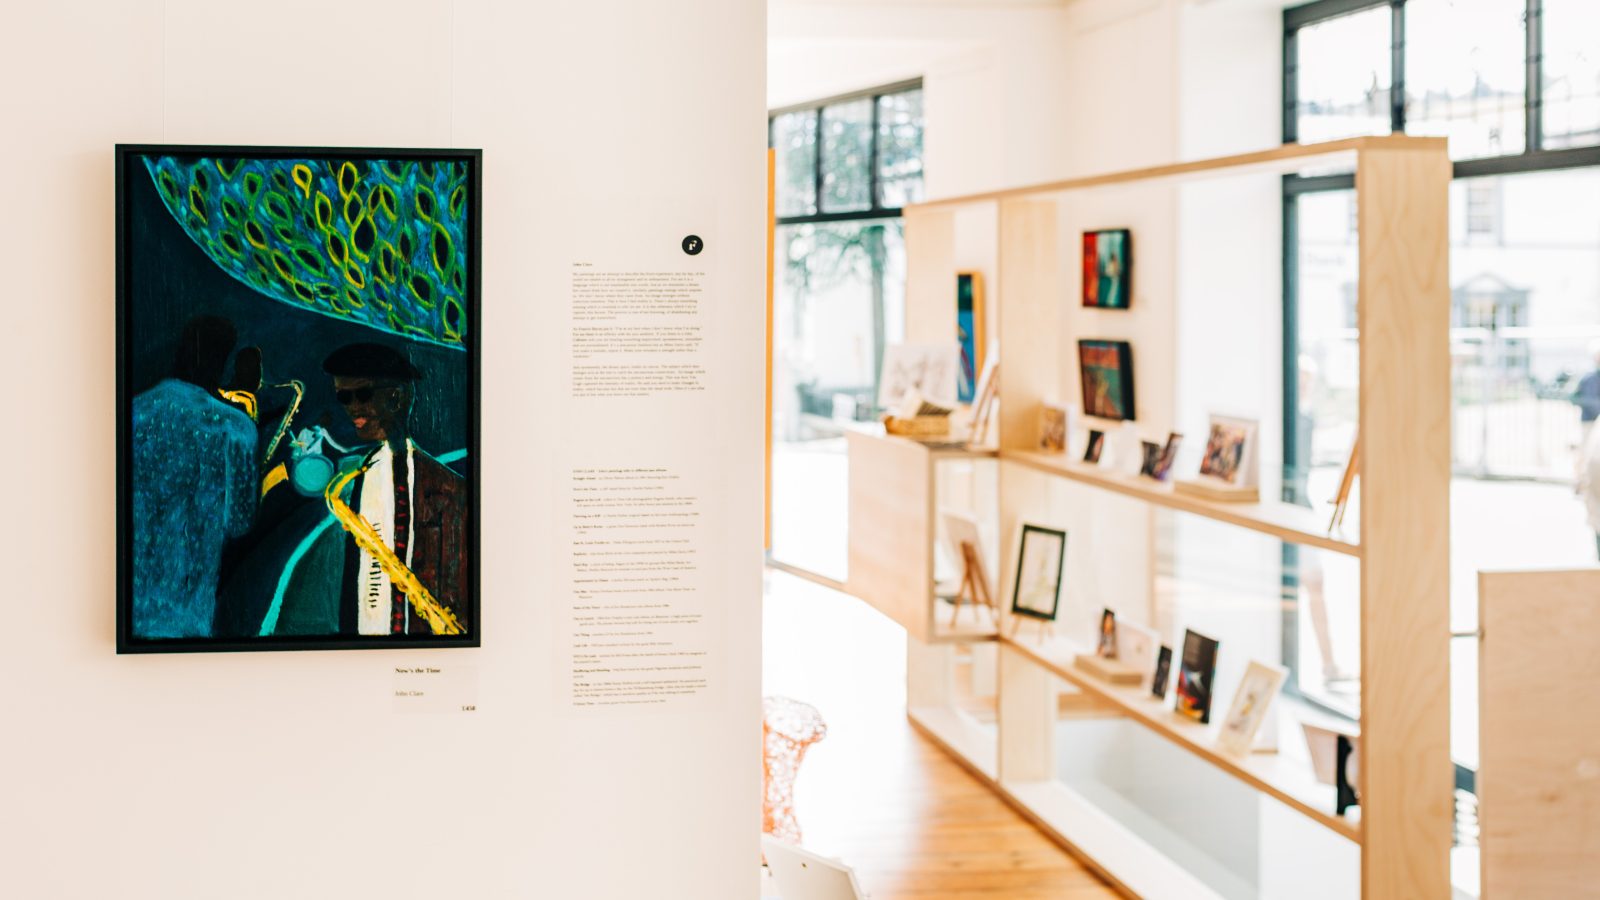 Art gallery interior featuring a vibrant painting on the left wall, with a visitor reading an informational plaque beside it. Shelves with framed artworks are visible across the room near a bright window, subtly showcasing the